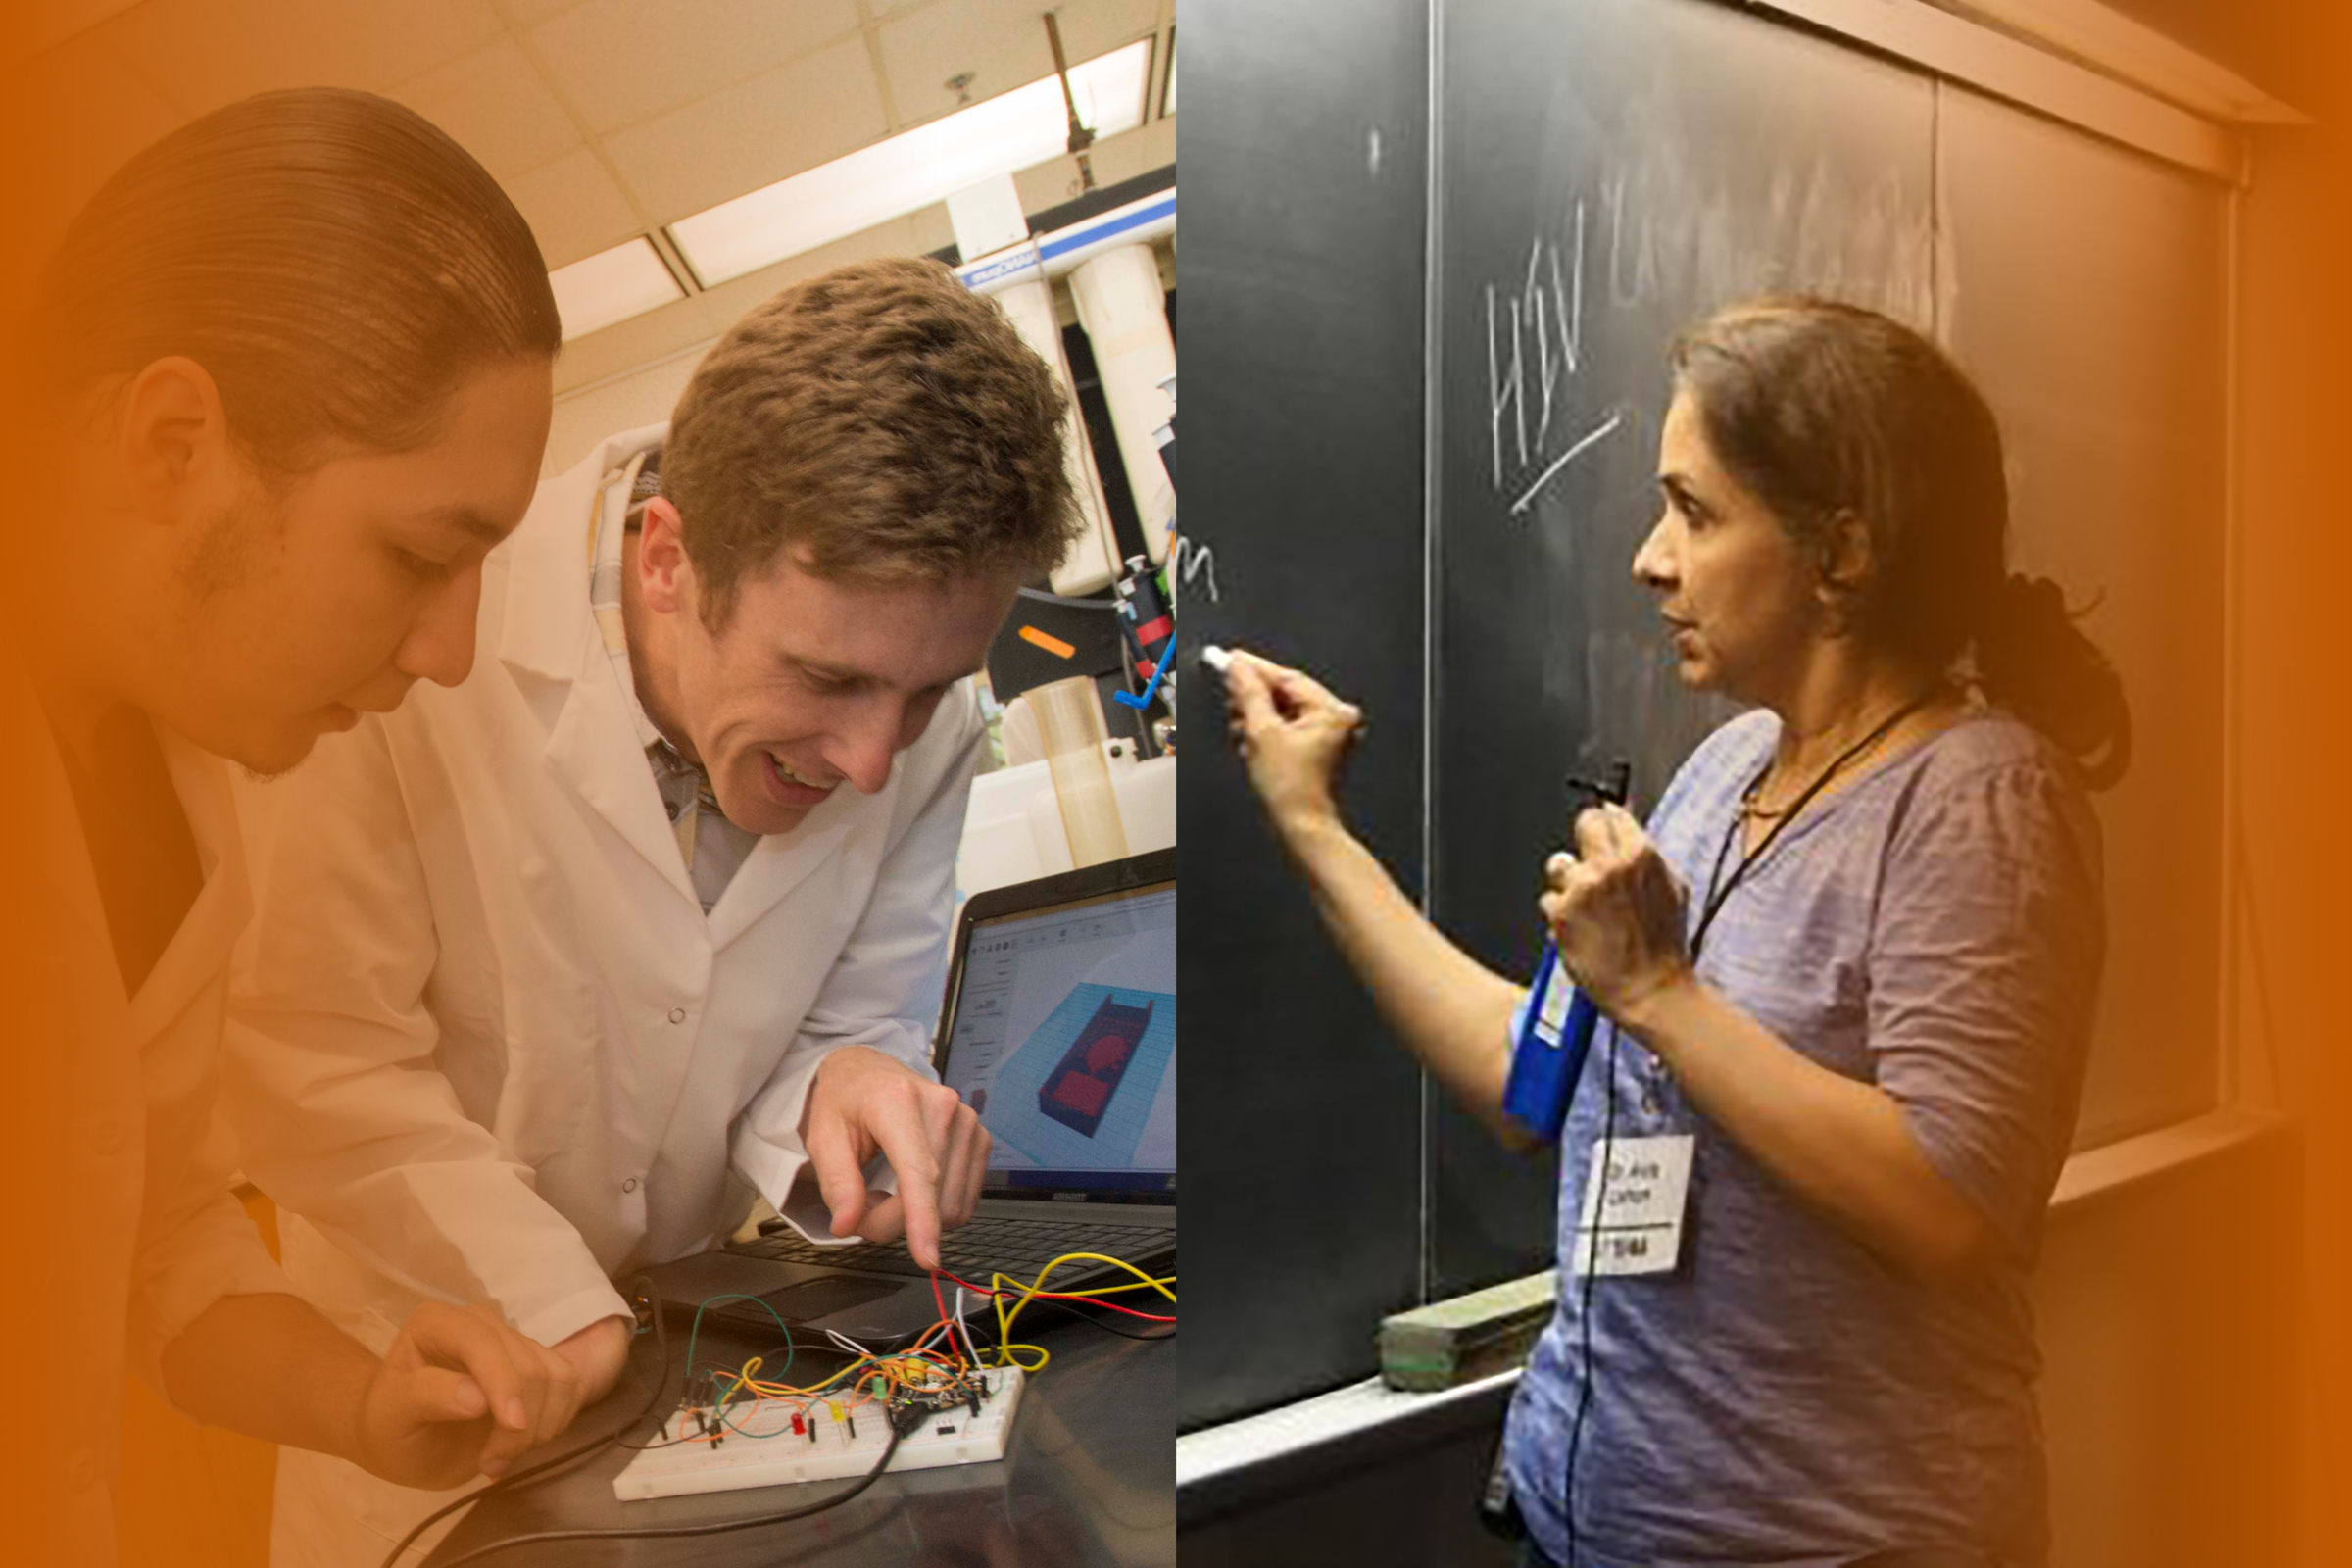 Tim Riedel (left) examines a wiring circuit with a student. Anita Latham (right) writes on a chalkboard.